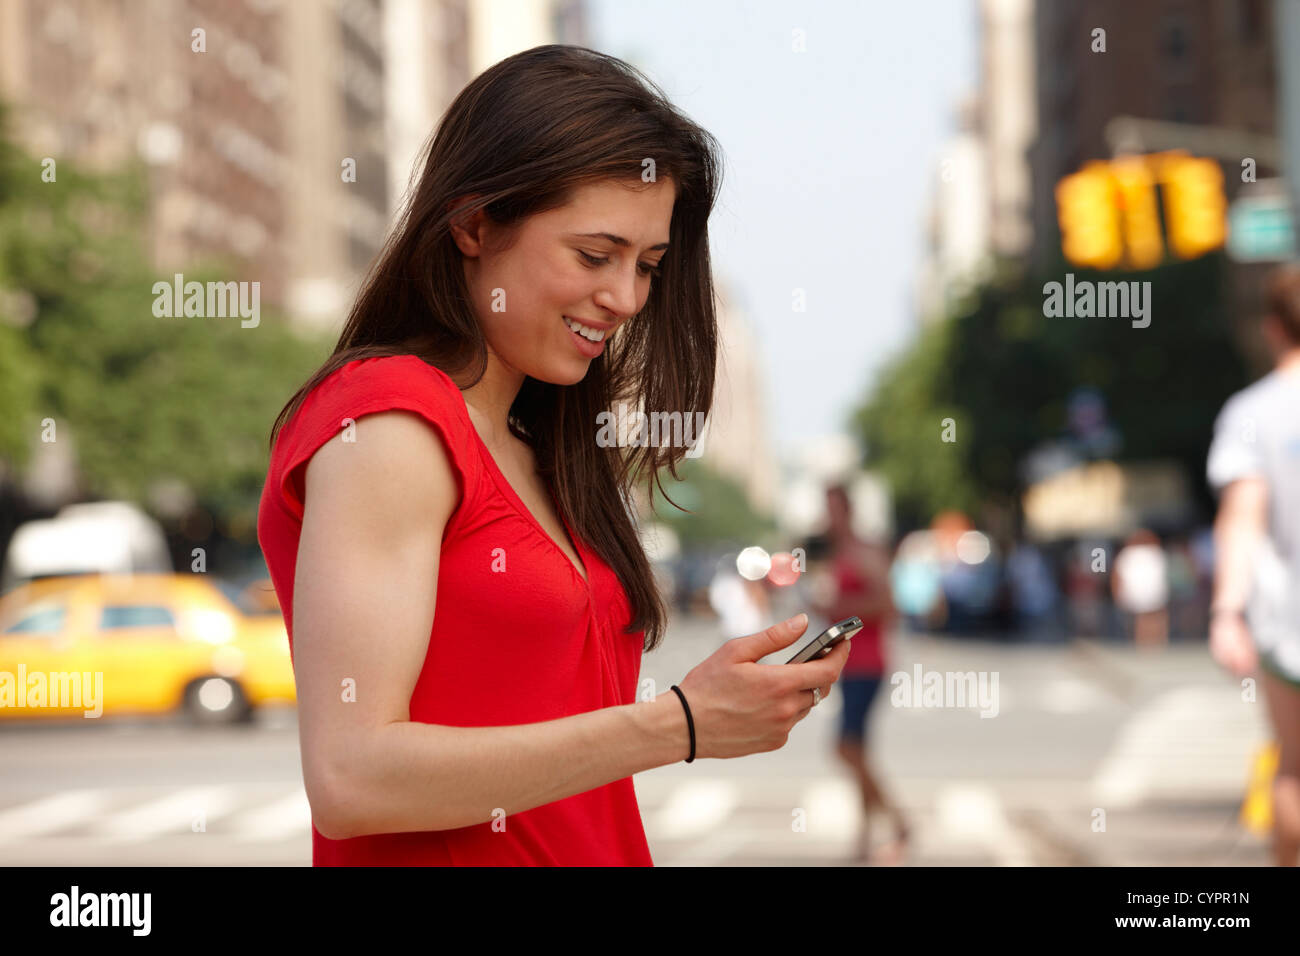 Caucasian woman using cell phone in city street Stock Photo